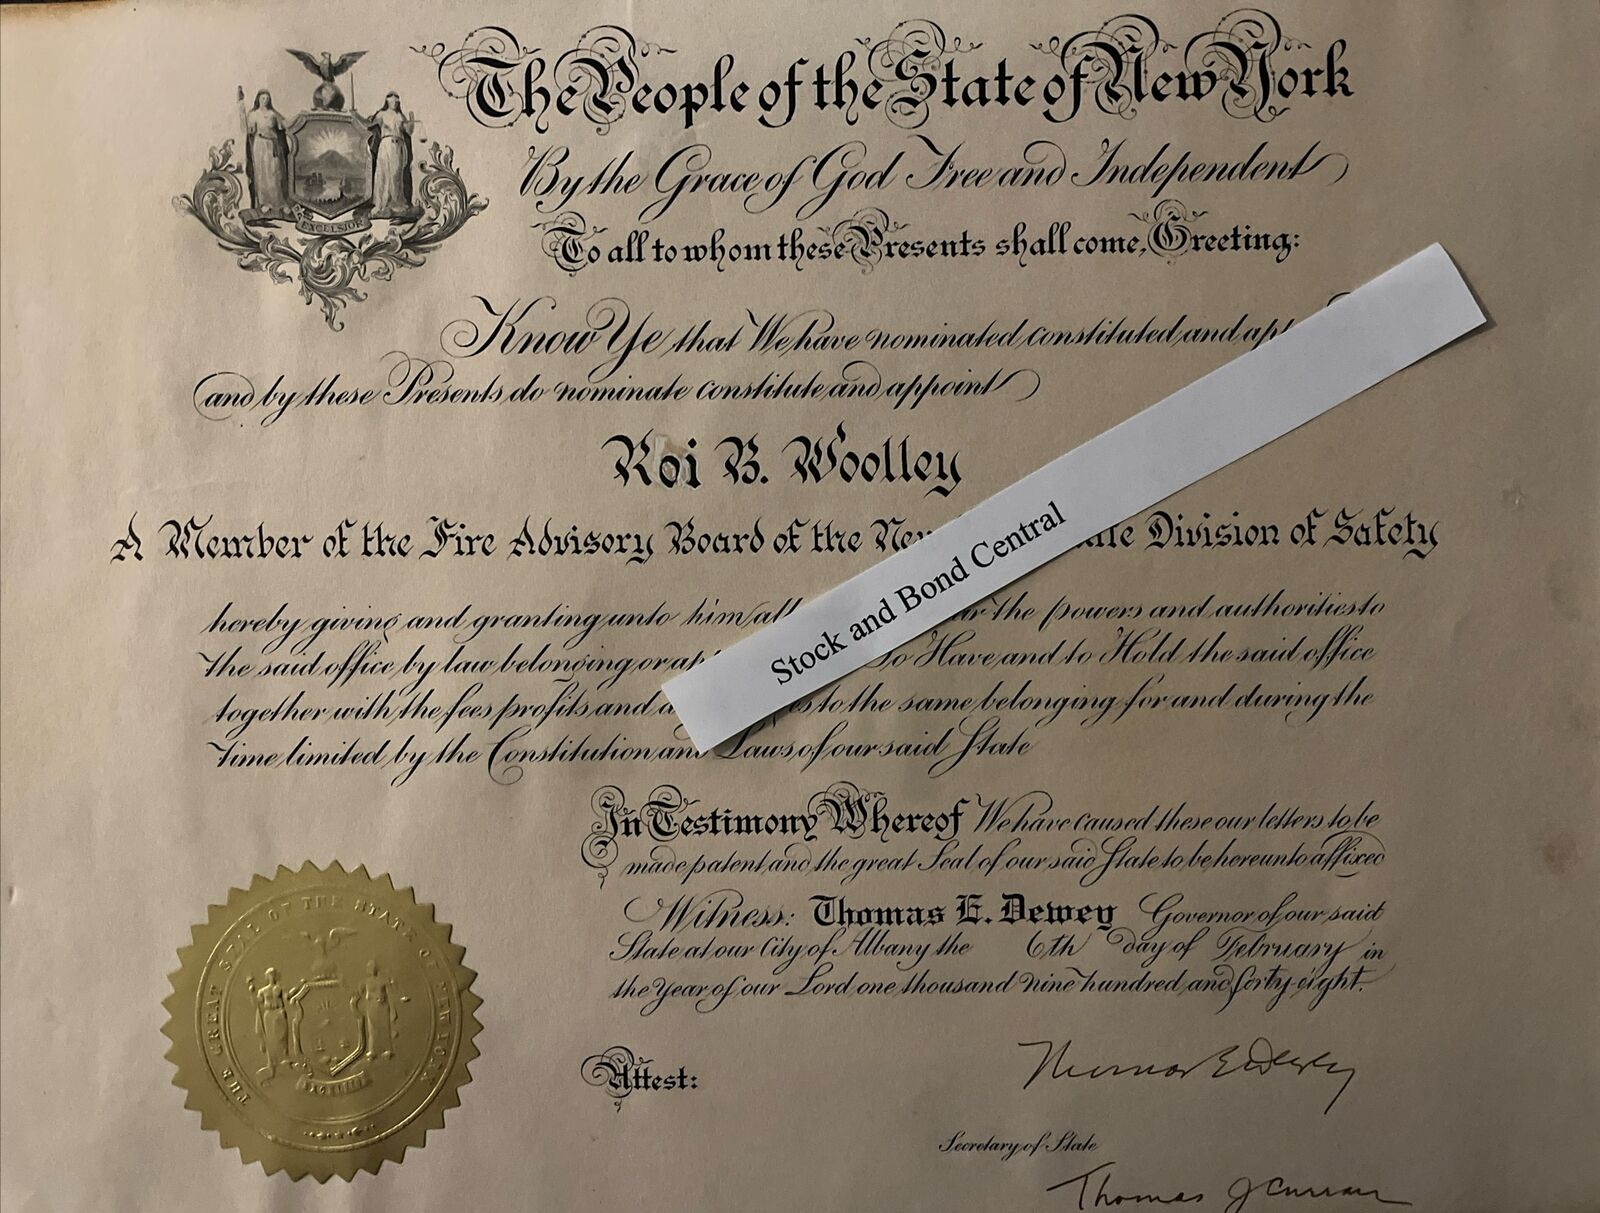 Thomas E. Dewey Signature NYFD Commendation Dated 1948, New York Fire Department